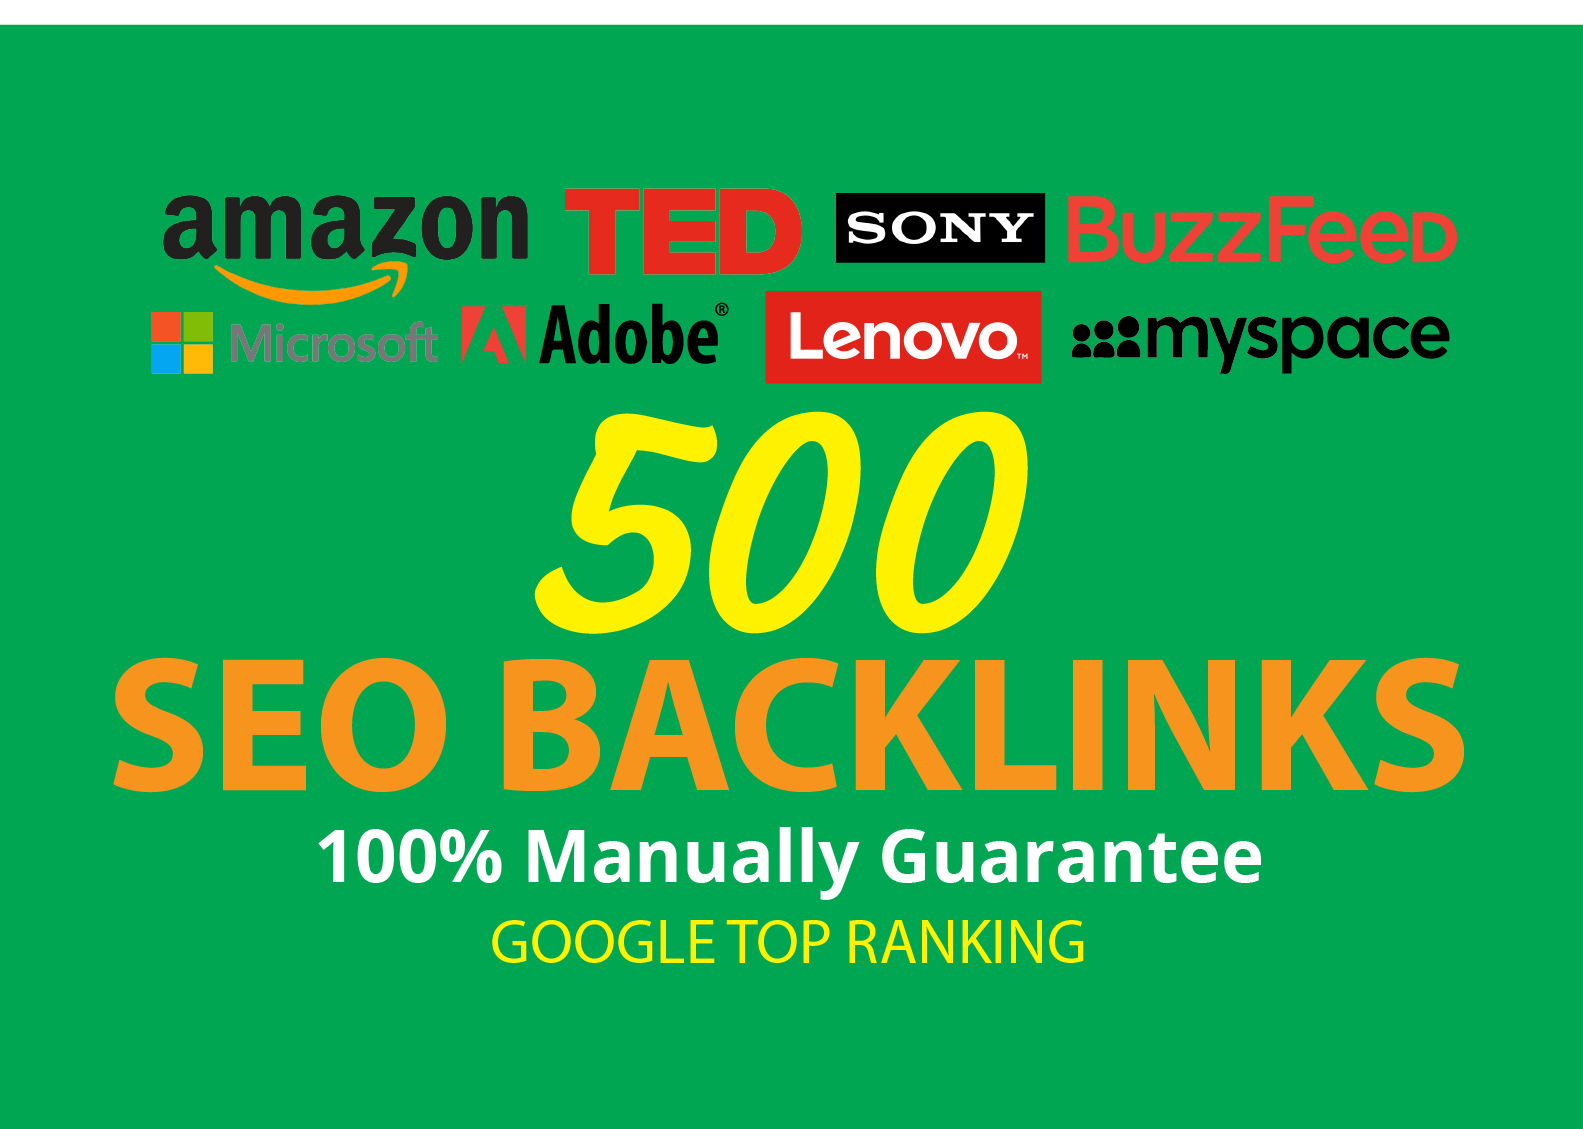 Permanent 500 Profile Backlinks Give Your Site HUGE Boost For Google 1st Page Rankings